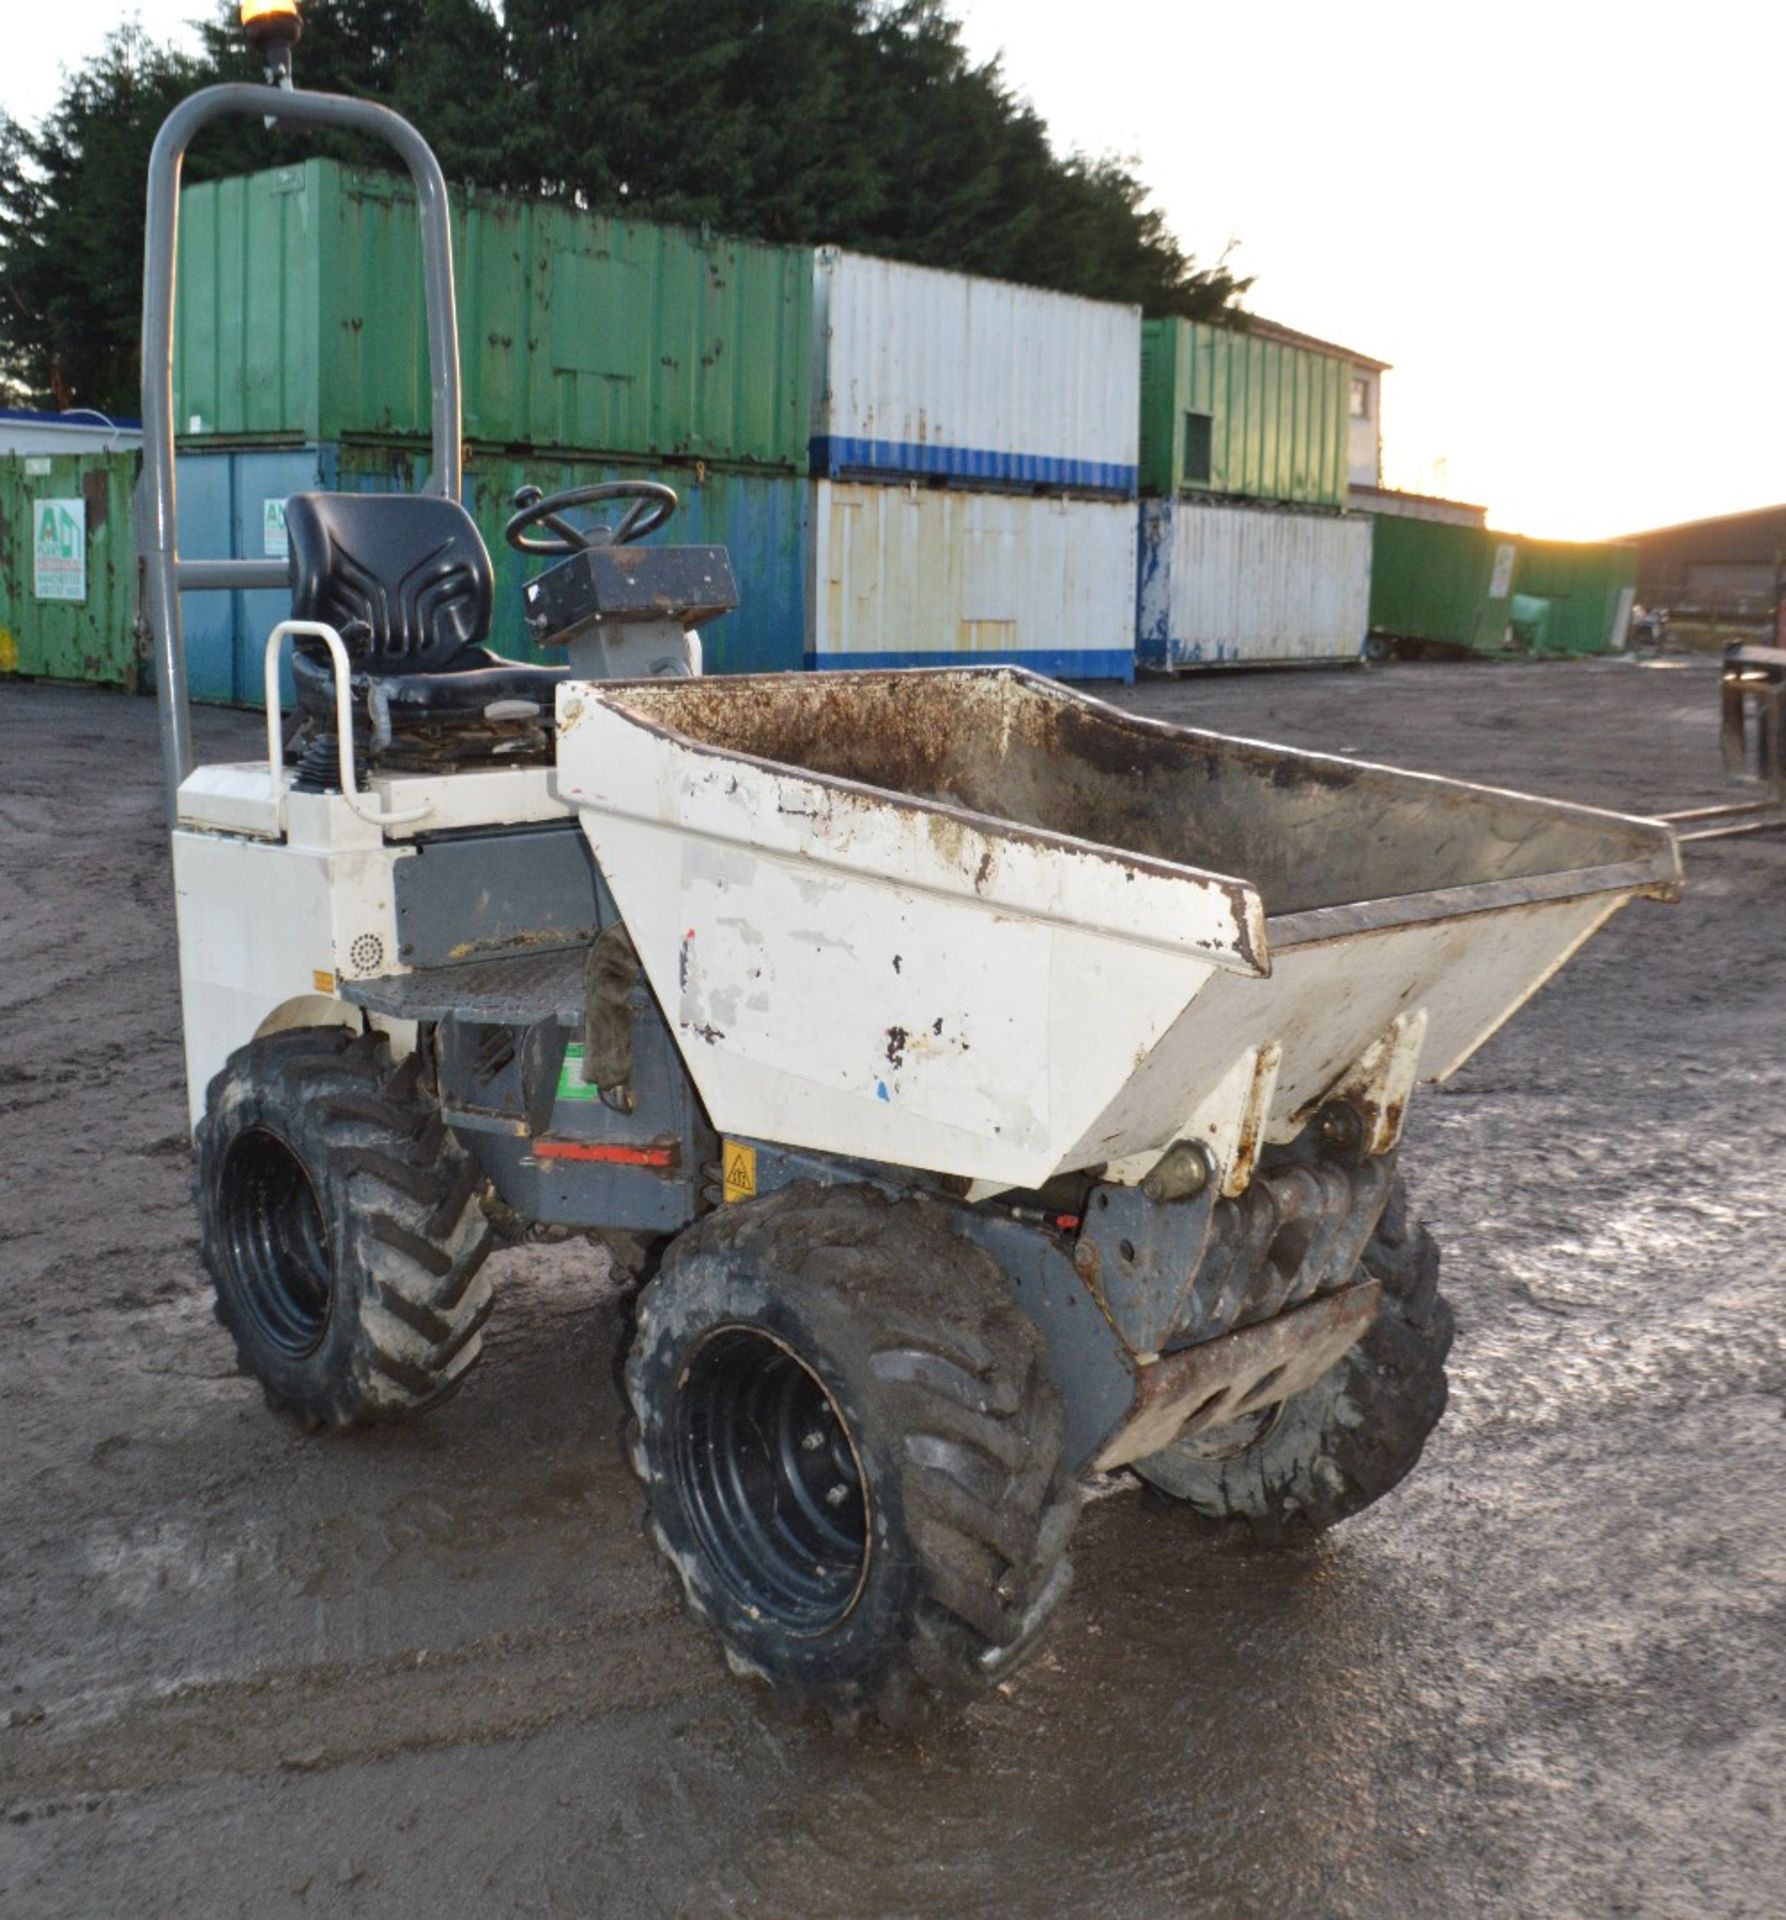 Benford Terex HD1000 hi tip dumper
Year: 2006
S/N: E605HM200
Recorded Hours: 1515
* Problem with